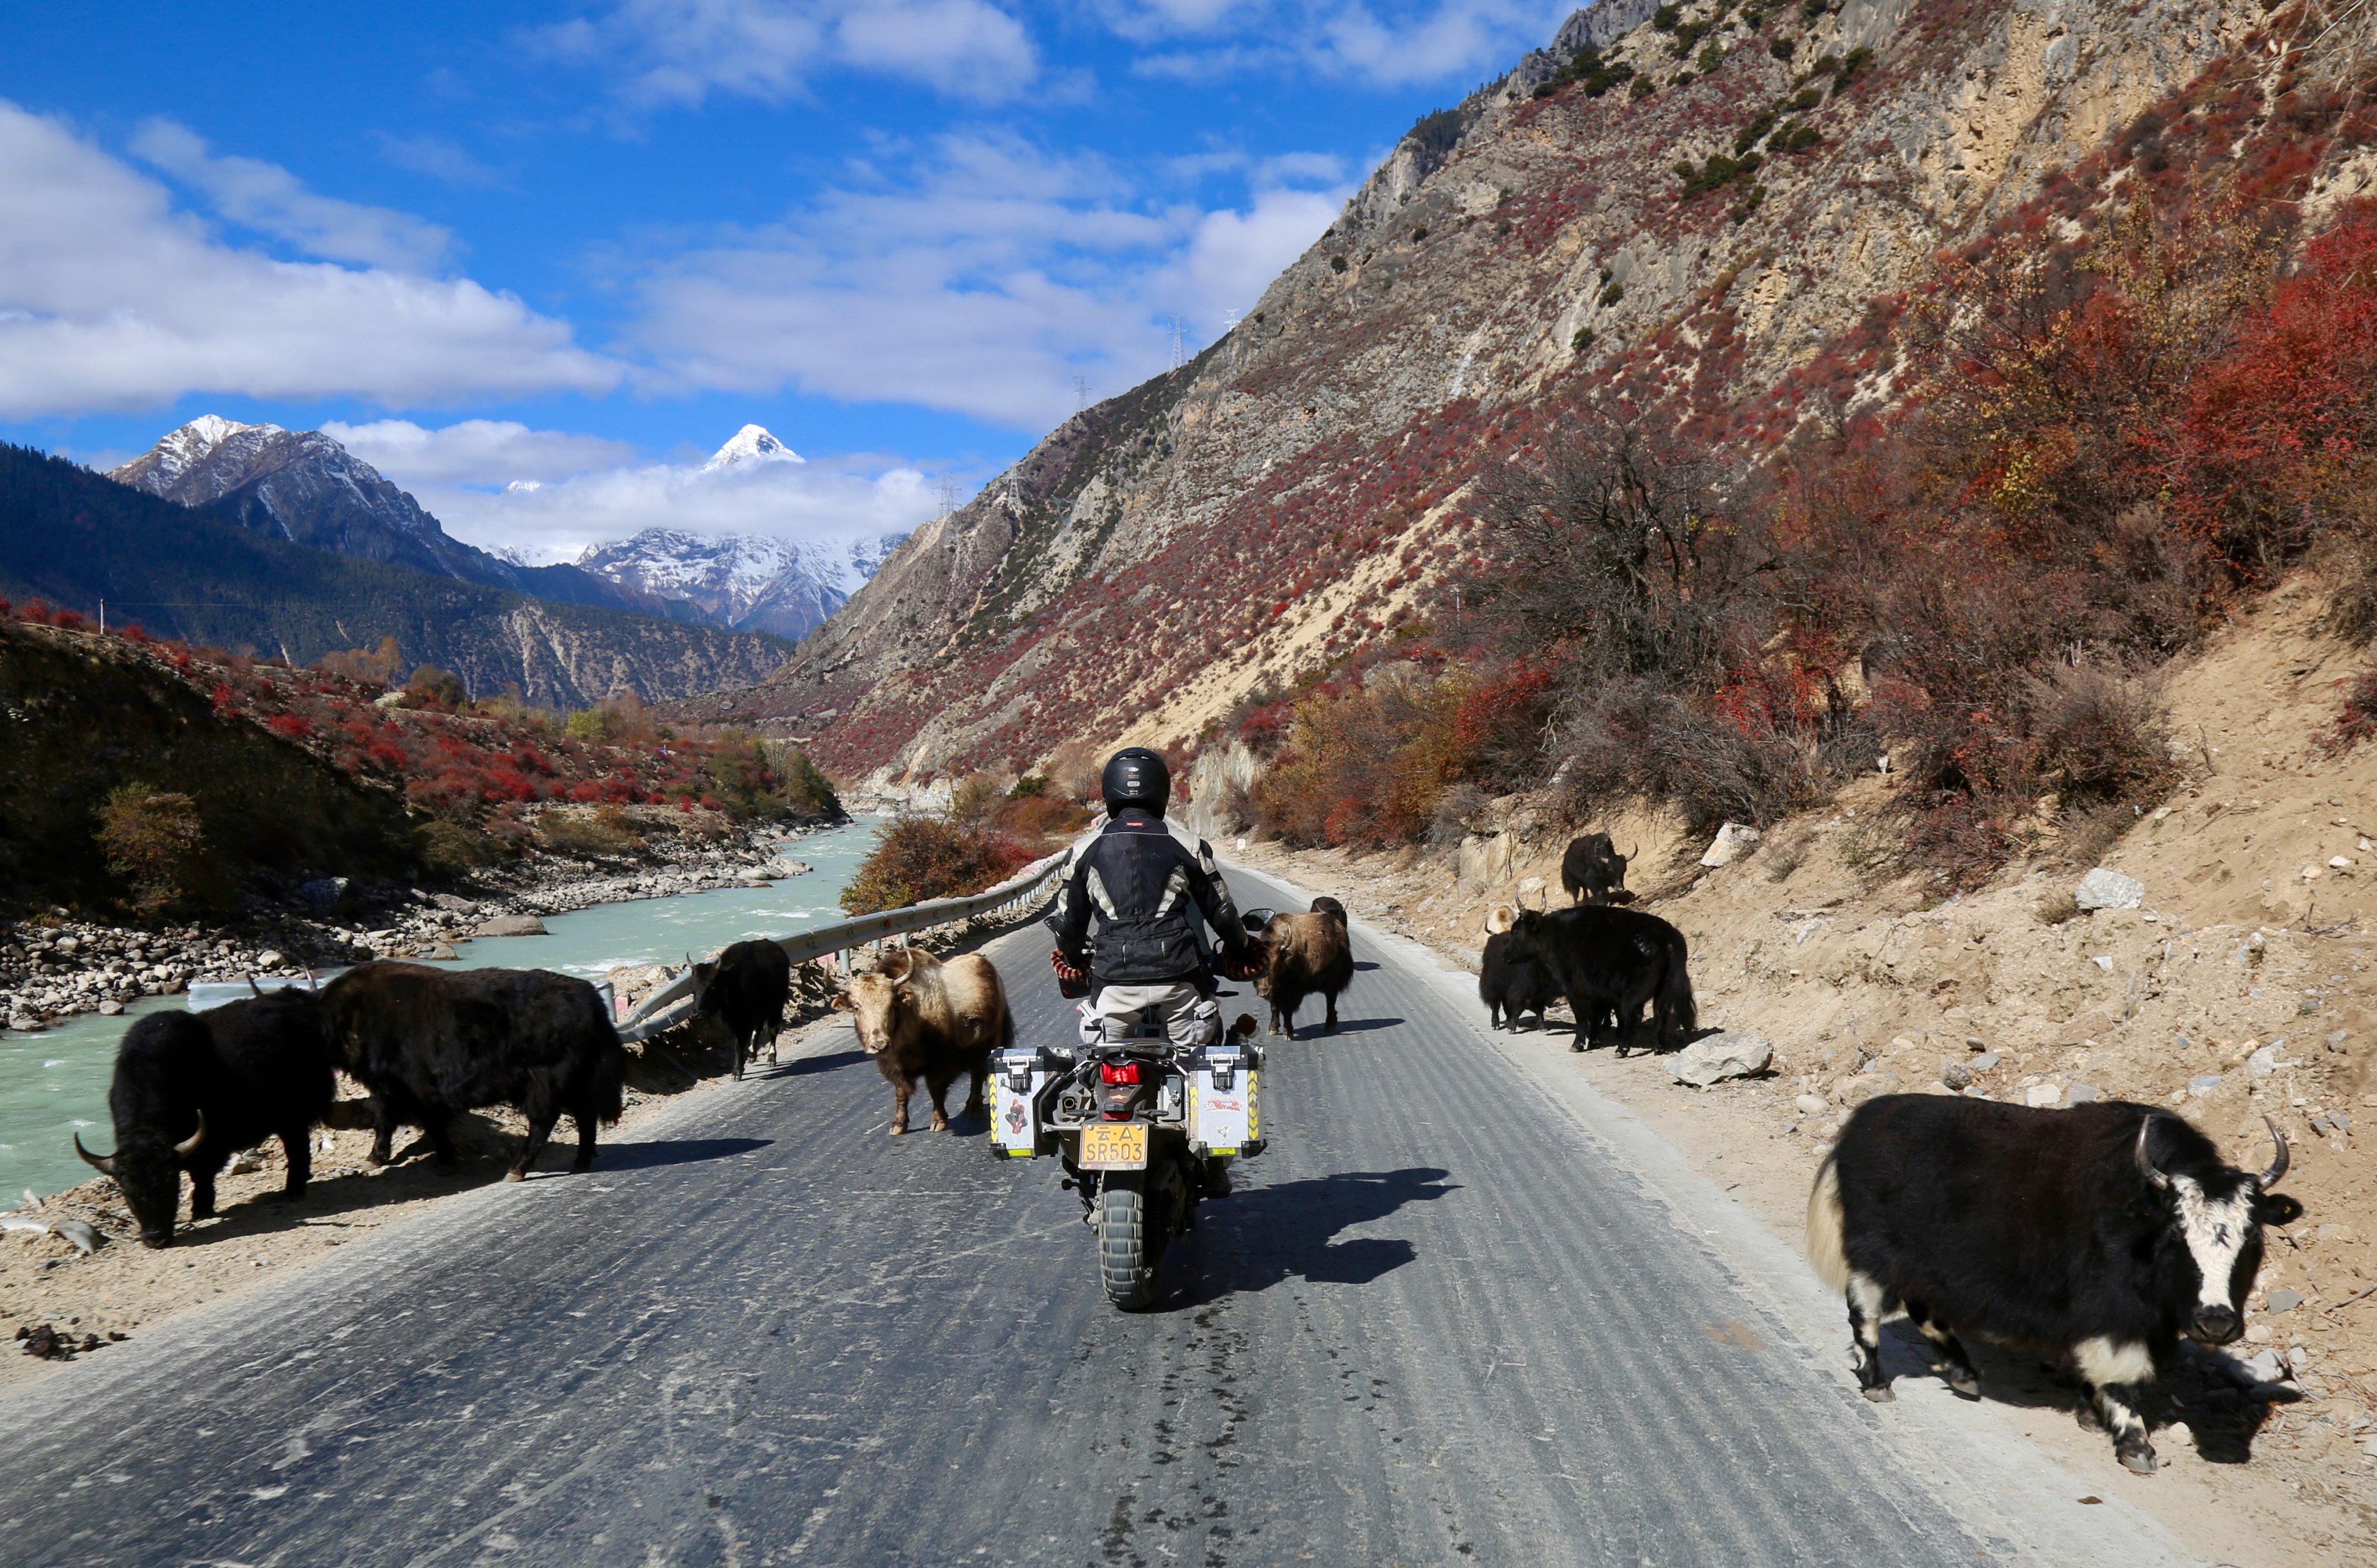 Wandering yaks are a constant on the roads of Tibet, adding another element of risk, November 2023. Photo: Ian Neubauer